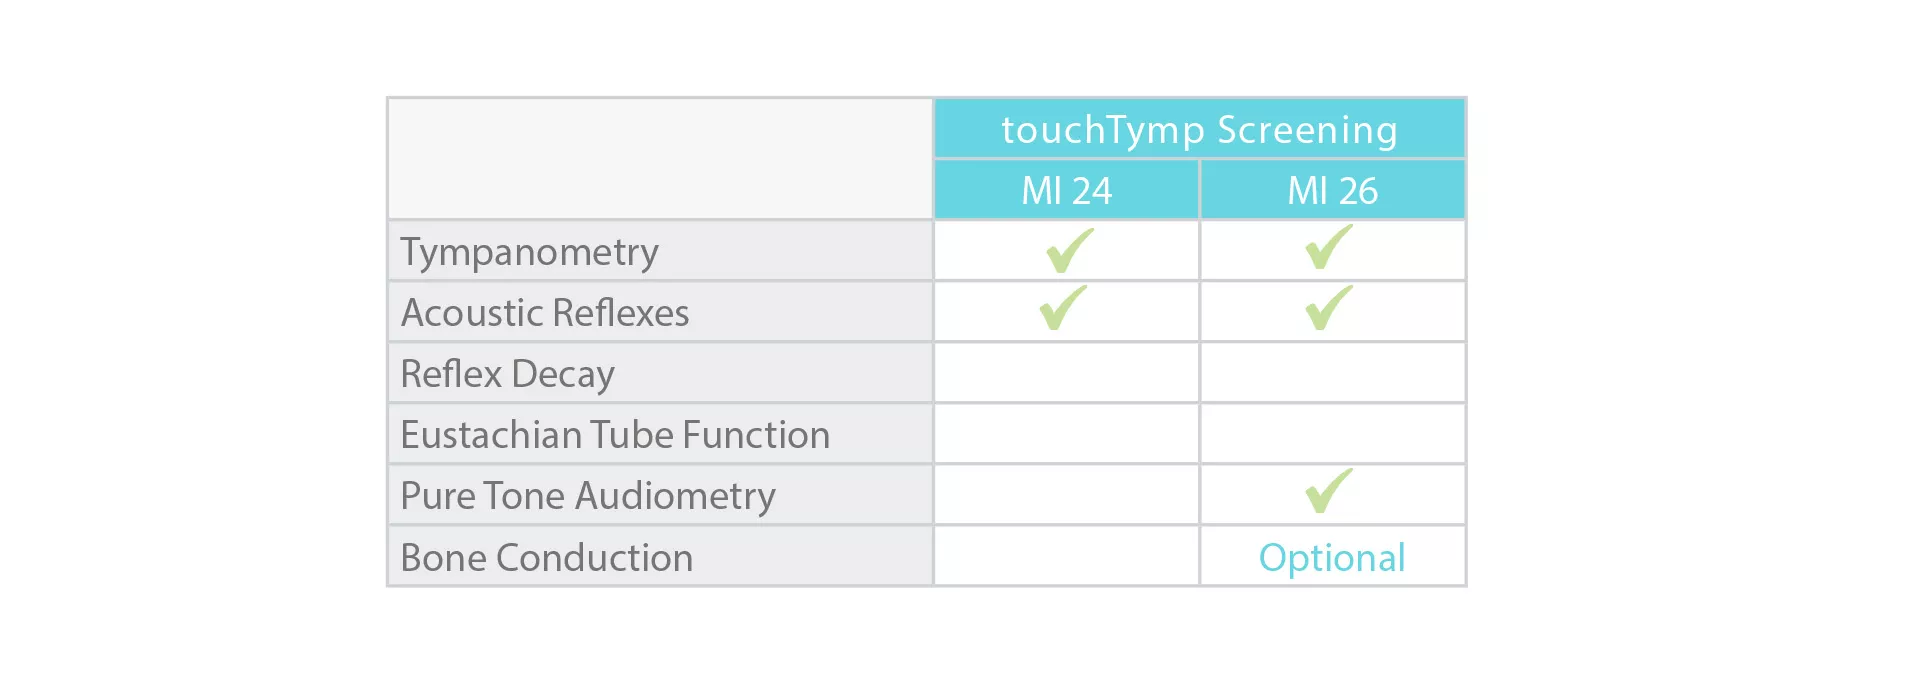 screening-touchtymp-table-2022